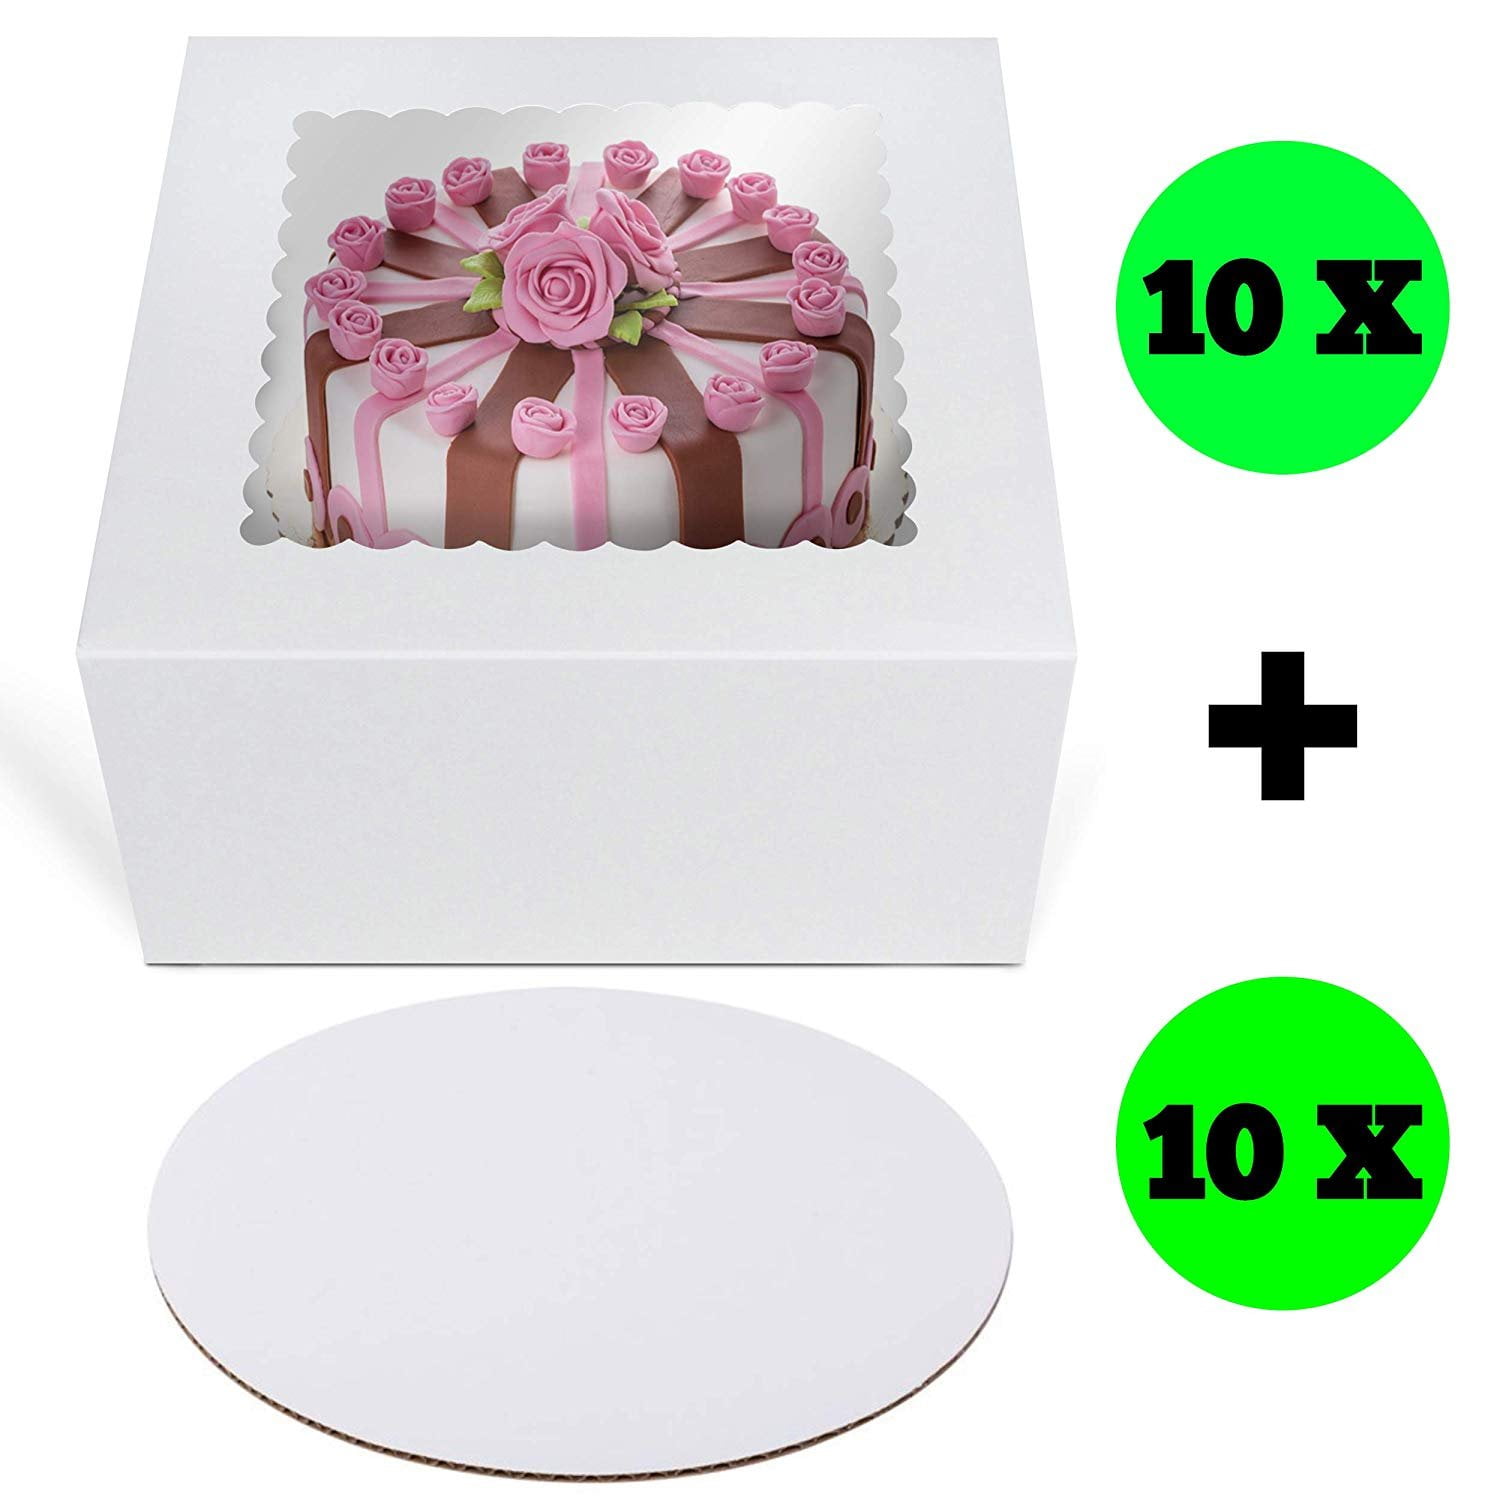 Bakery Craft 6 inch white square cake plates